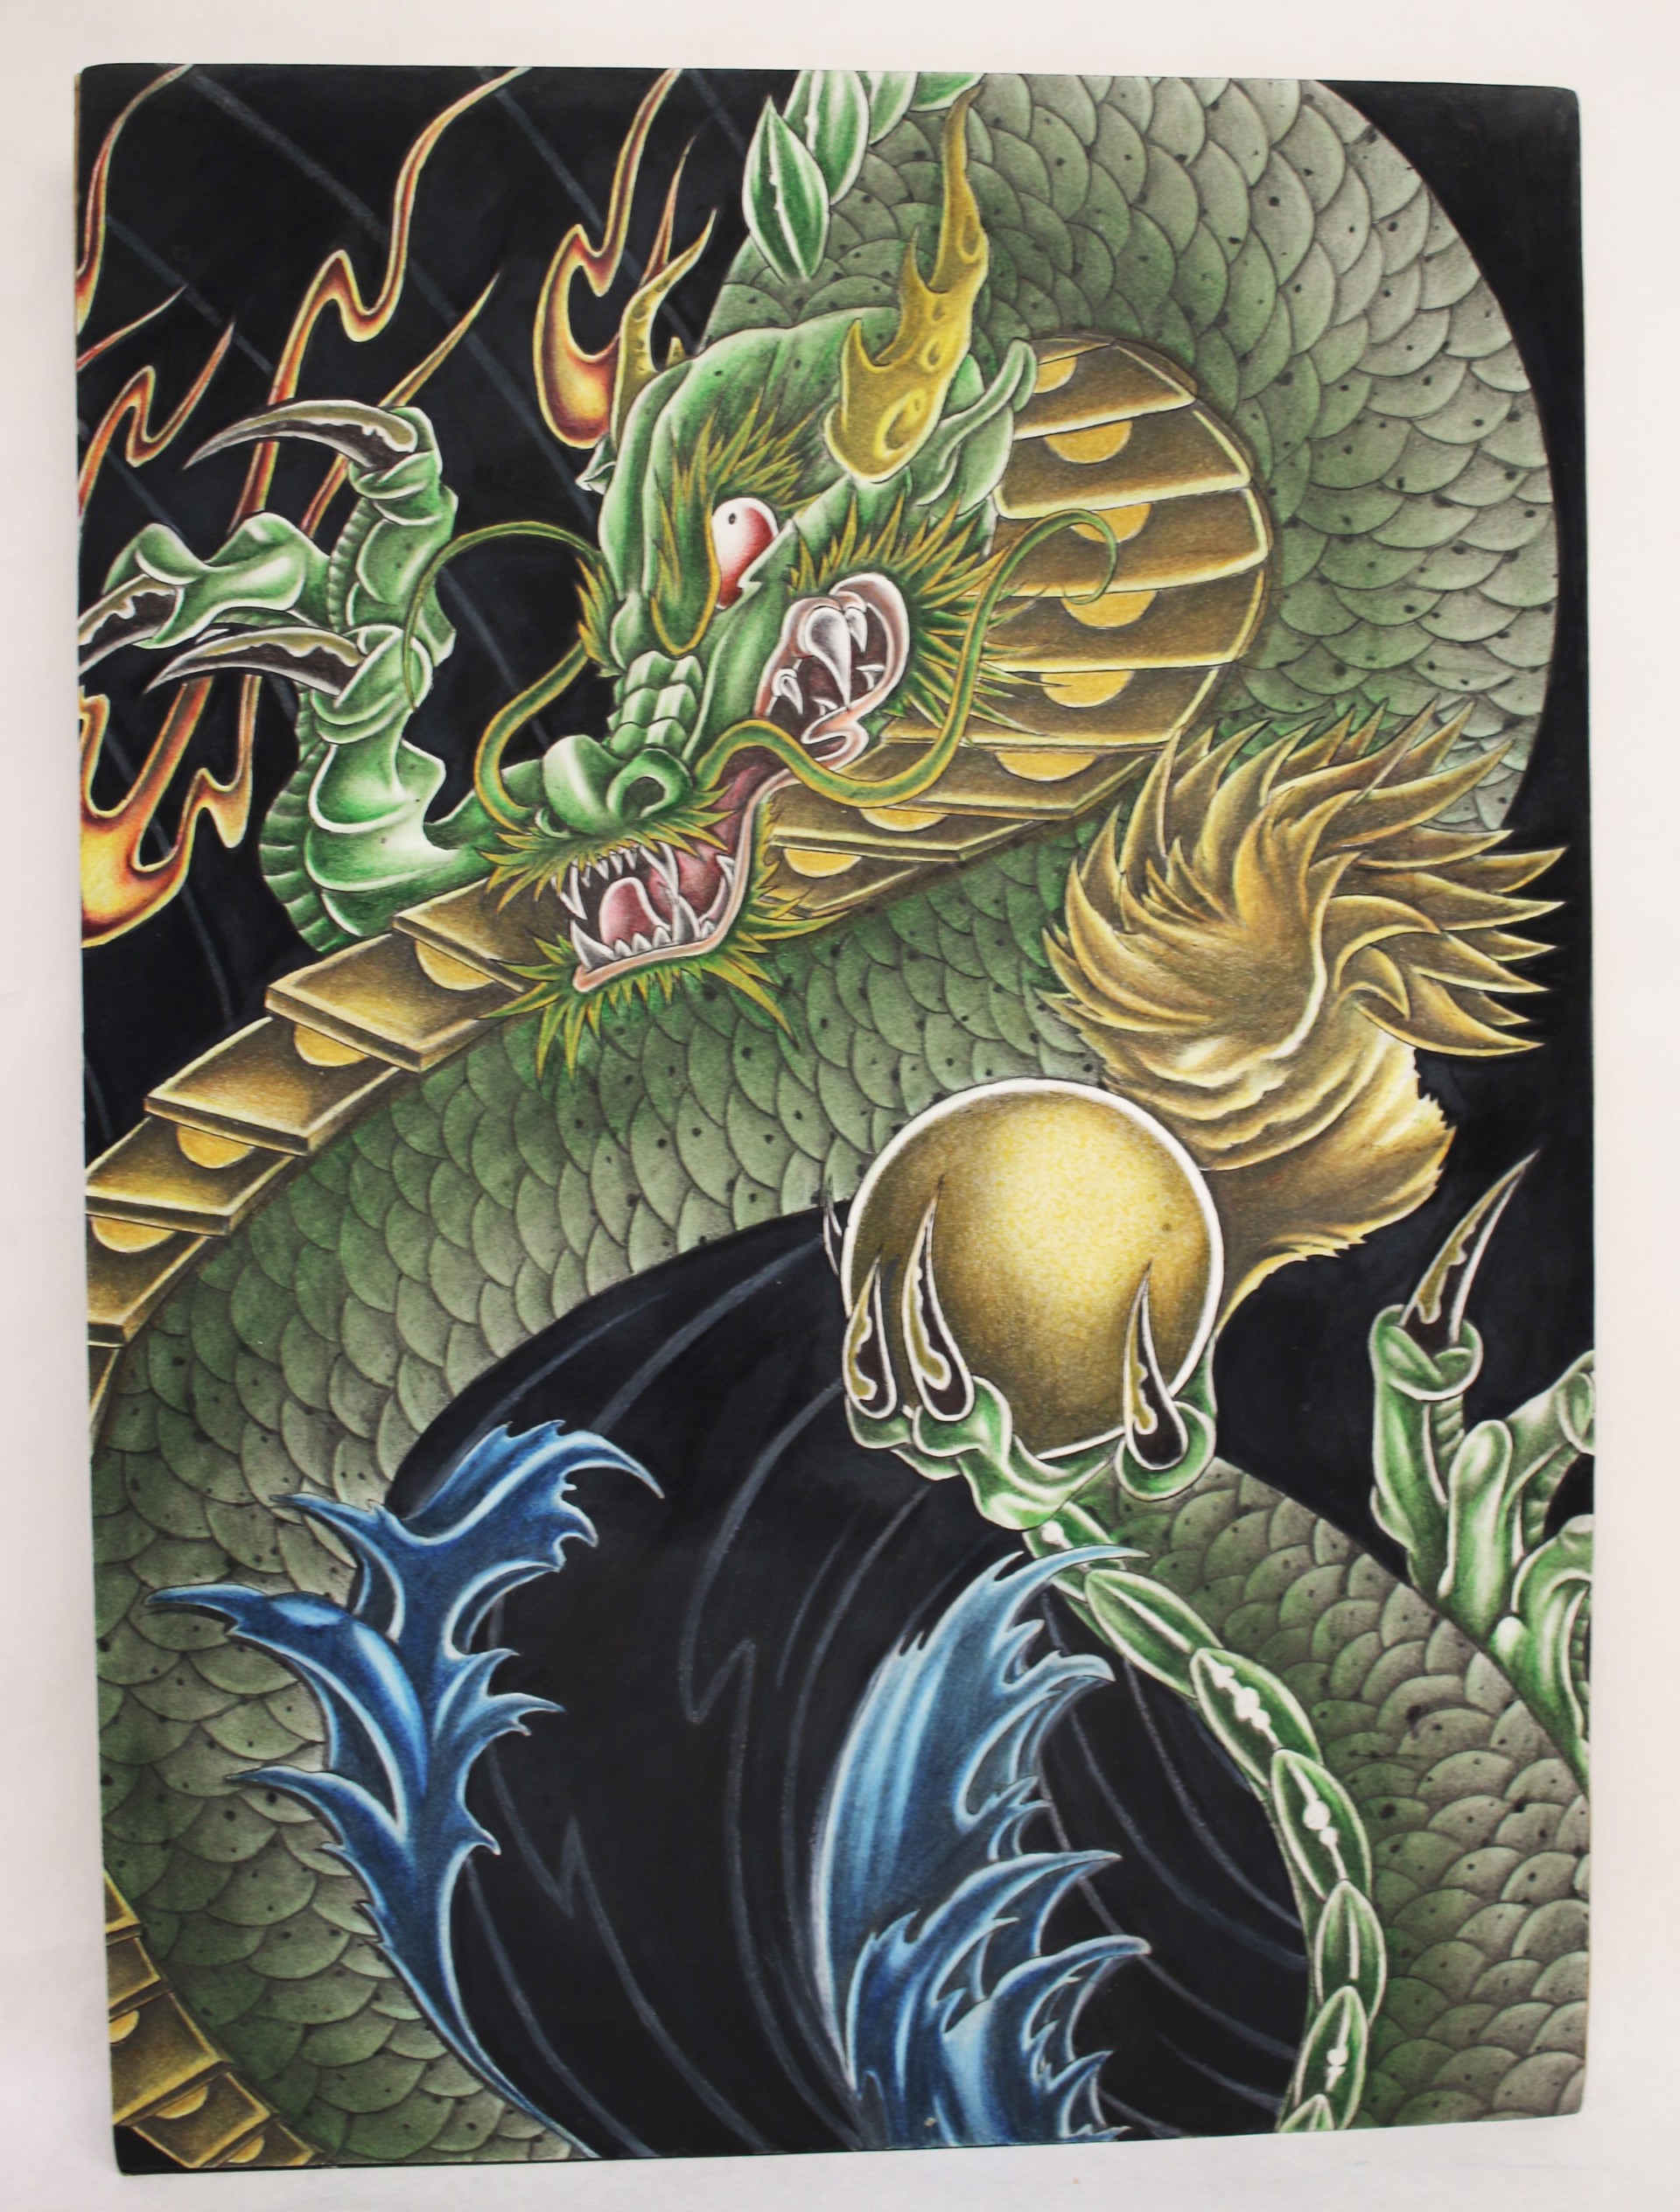 Enter The Dragon by Walter Walker